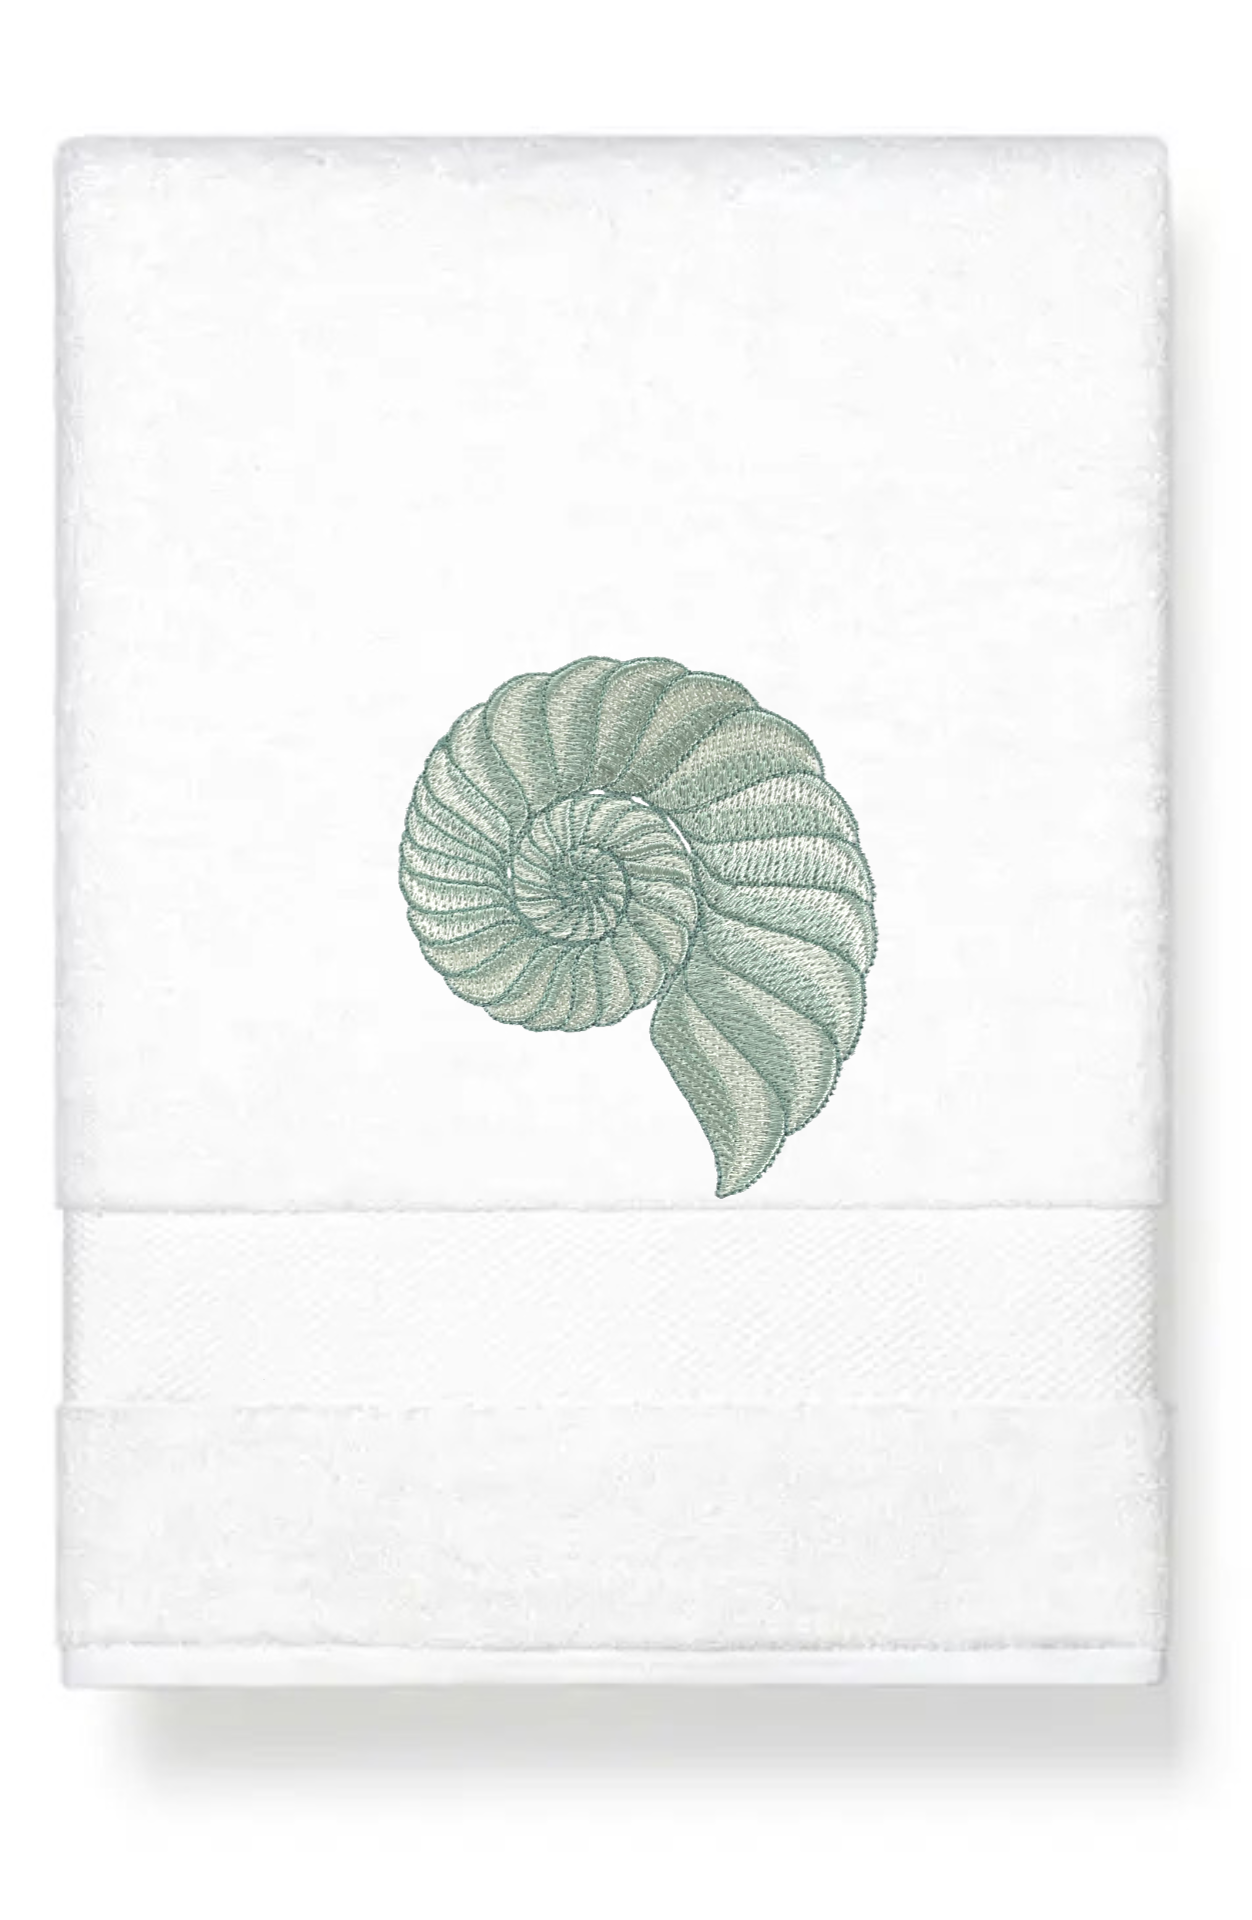 Embroidered Nautilus Shell Hand Towel. Elegant Nautilus in Beige or Green Embroidery with choice of towel color